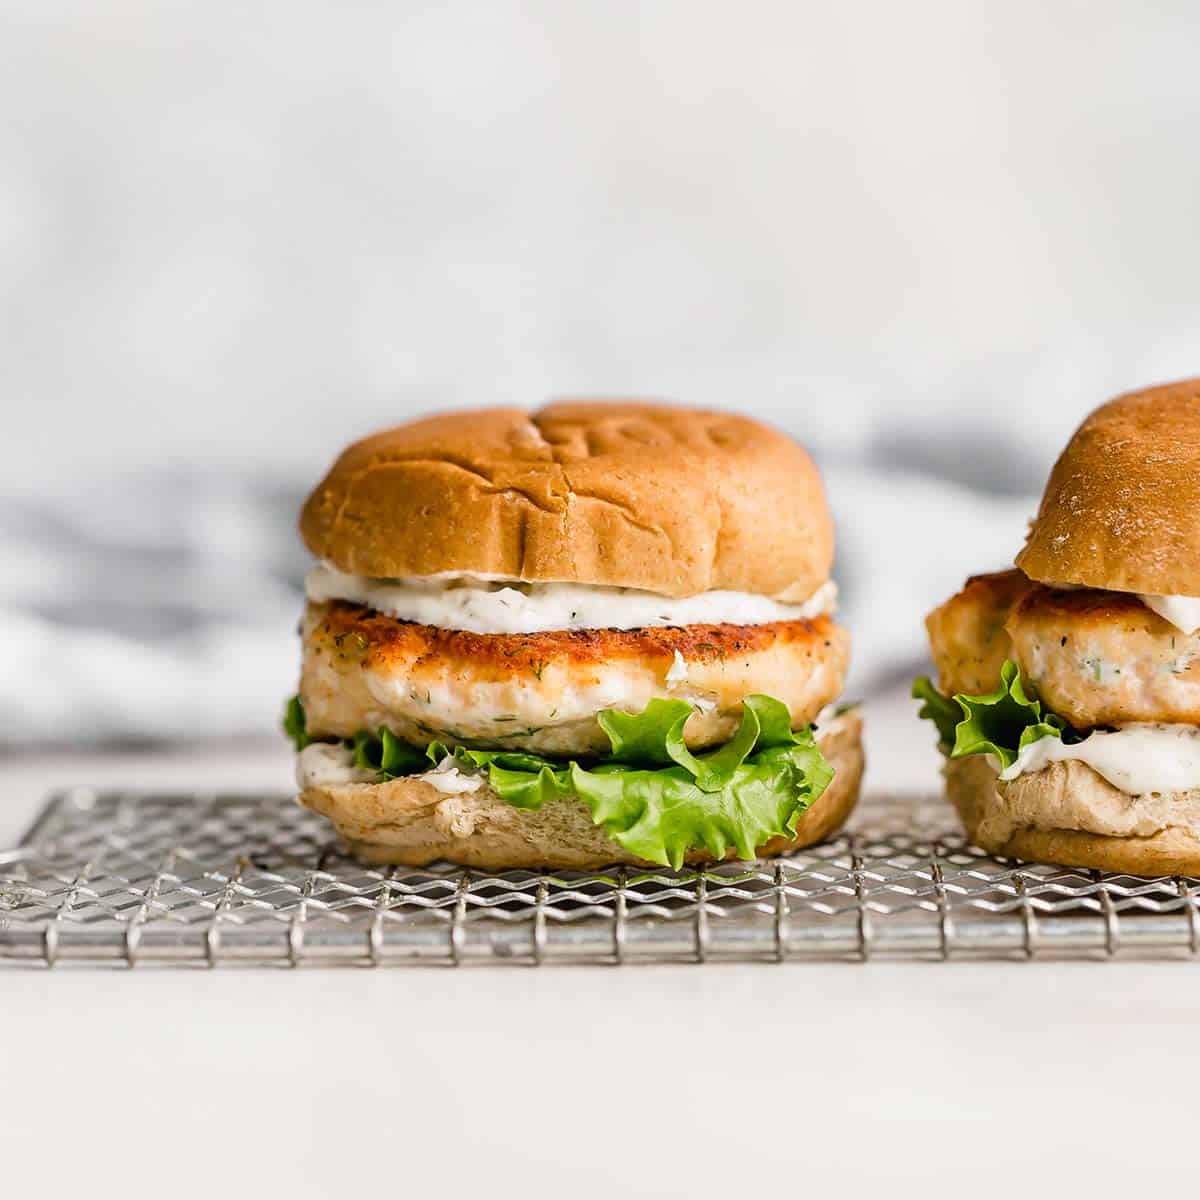 Salmon Burgers with dill sauce on a bun against a white background.